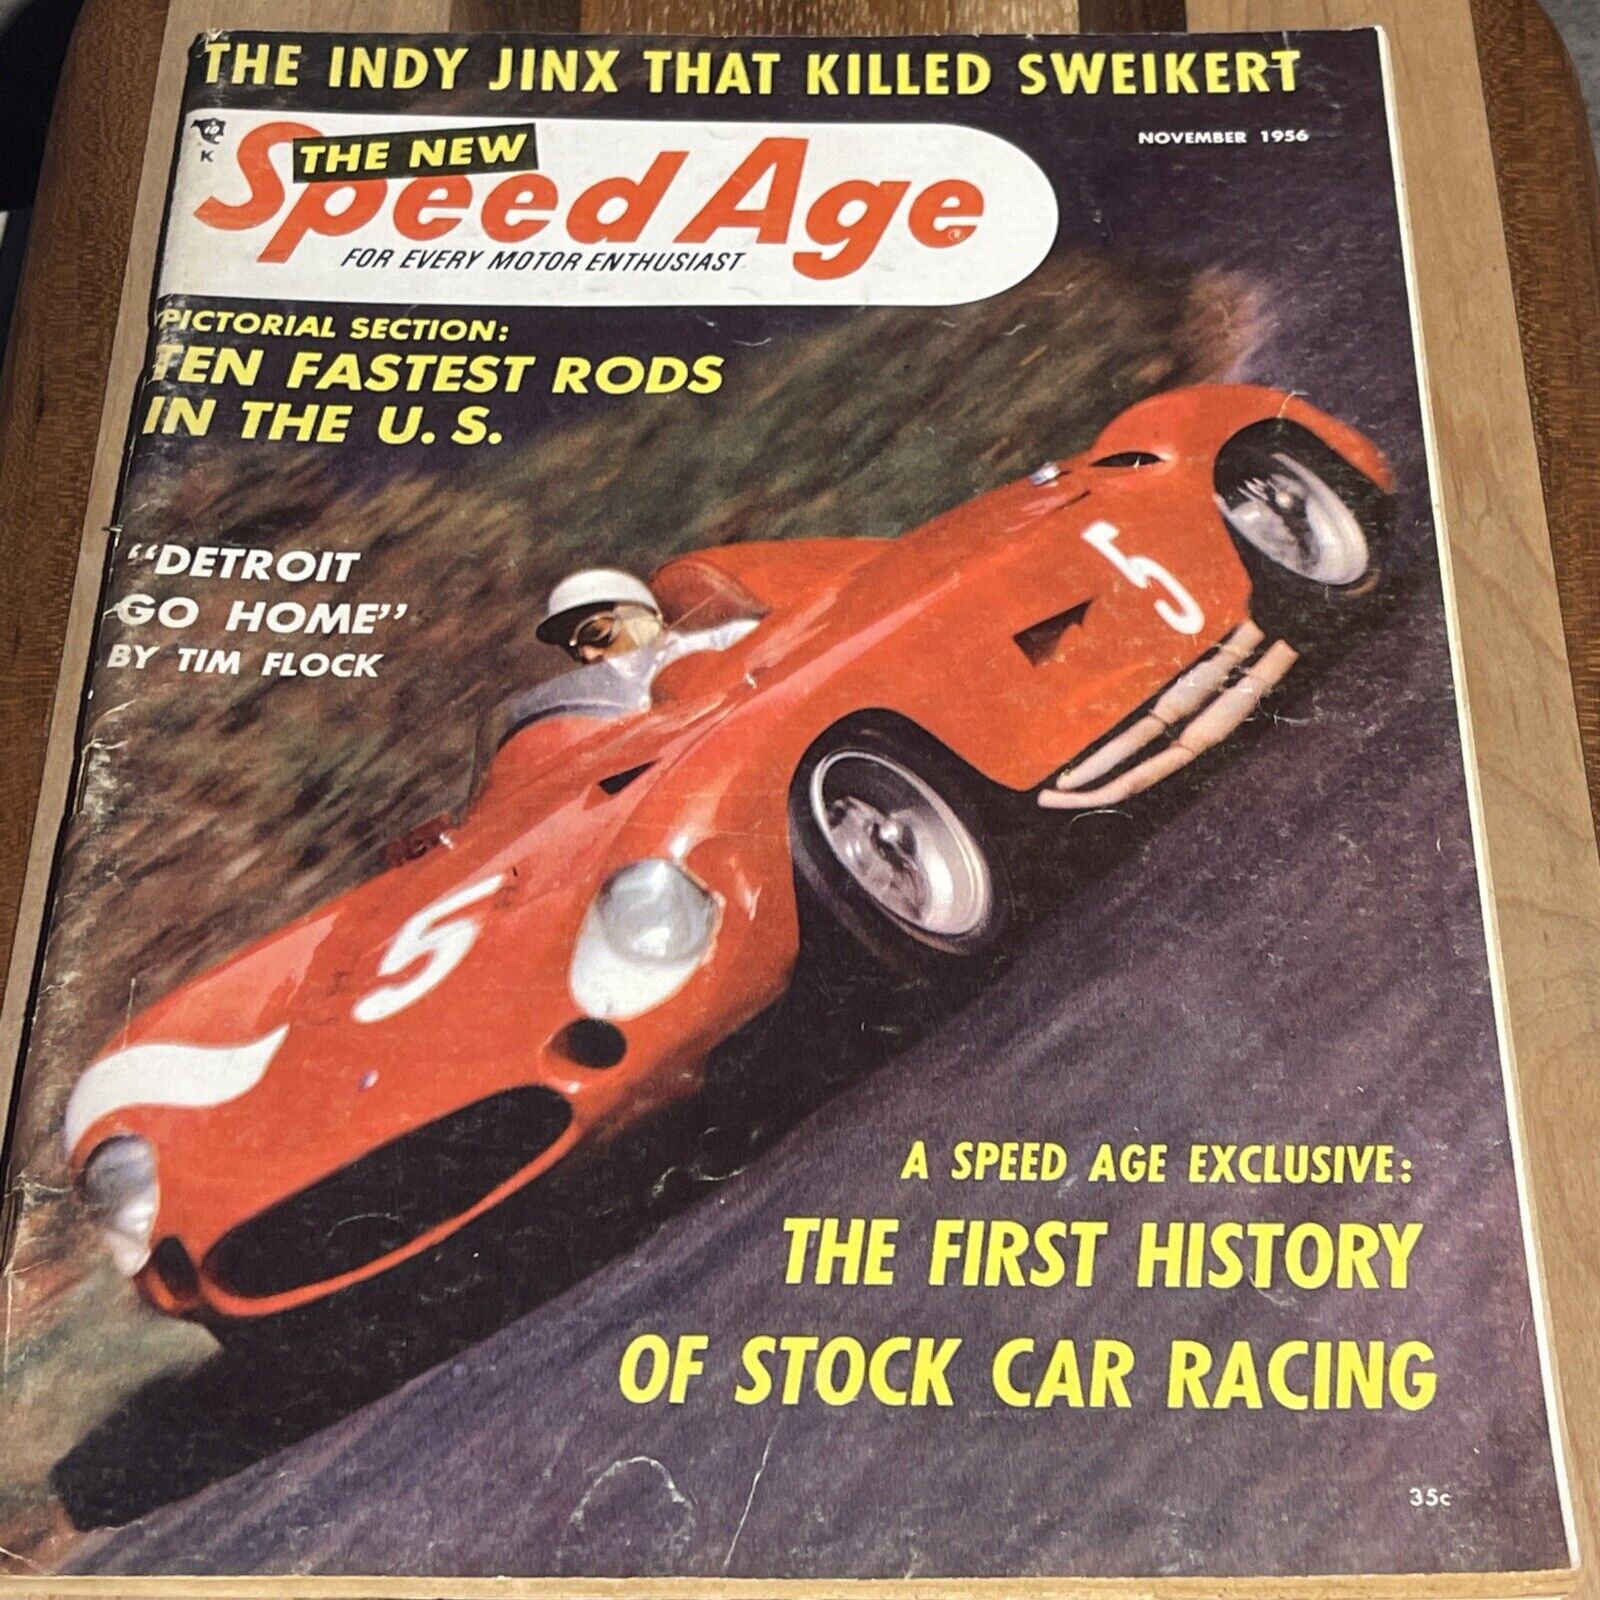 1956 Speed Age Magazine, featuring History of Stock Car Racing